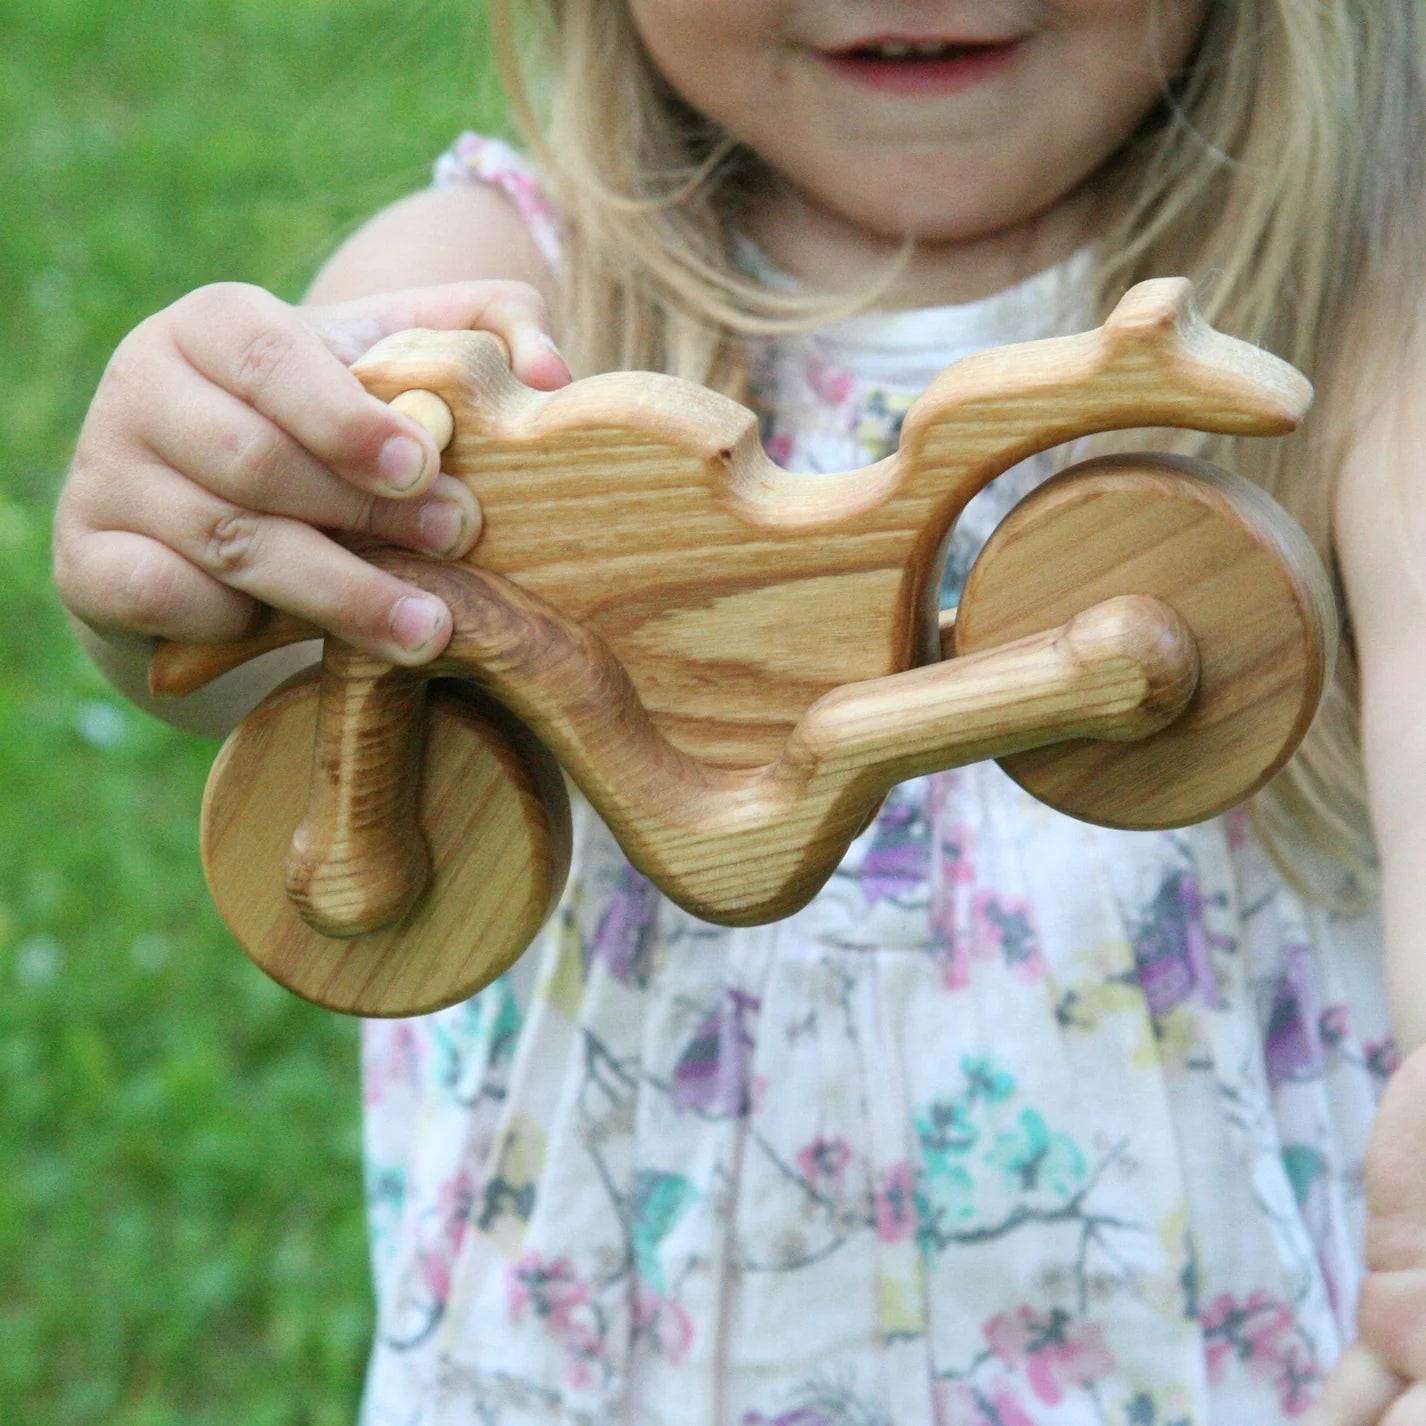 Wooden Motorcycle Motorbike Toy for Kids